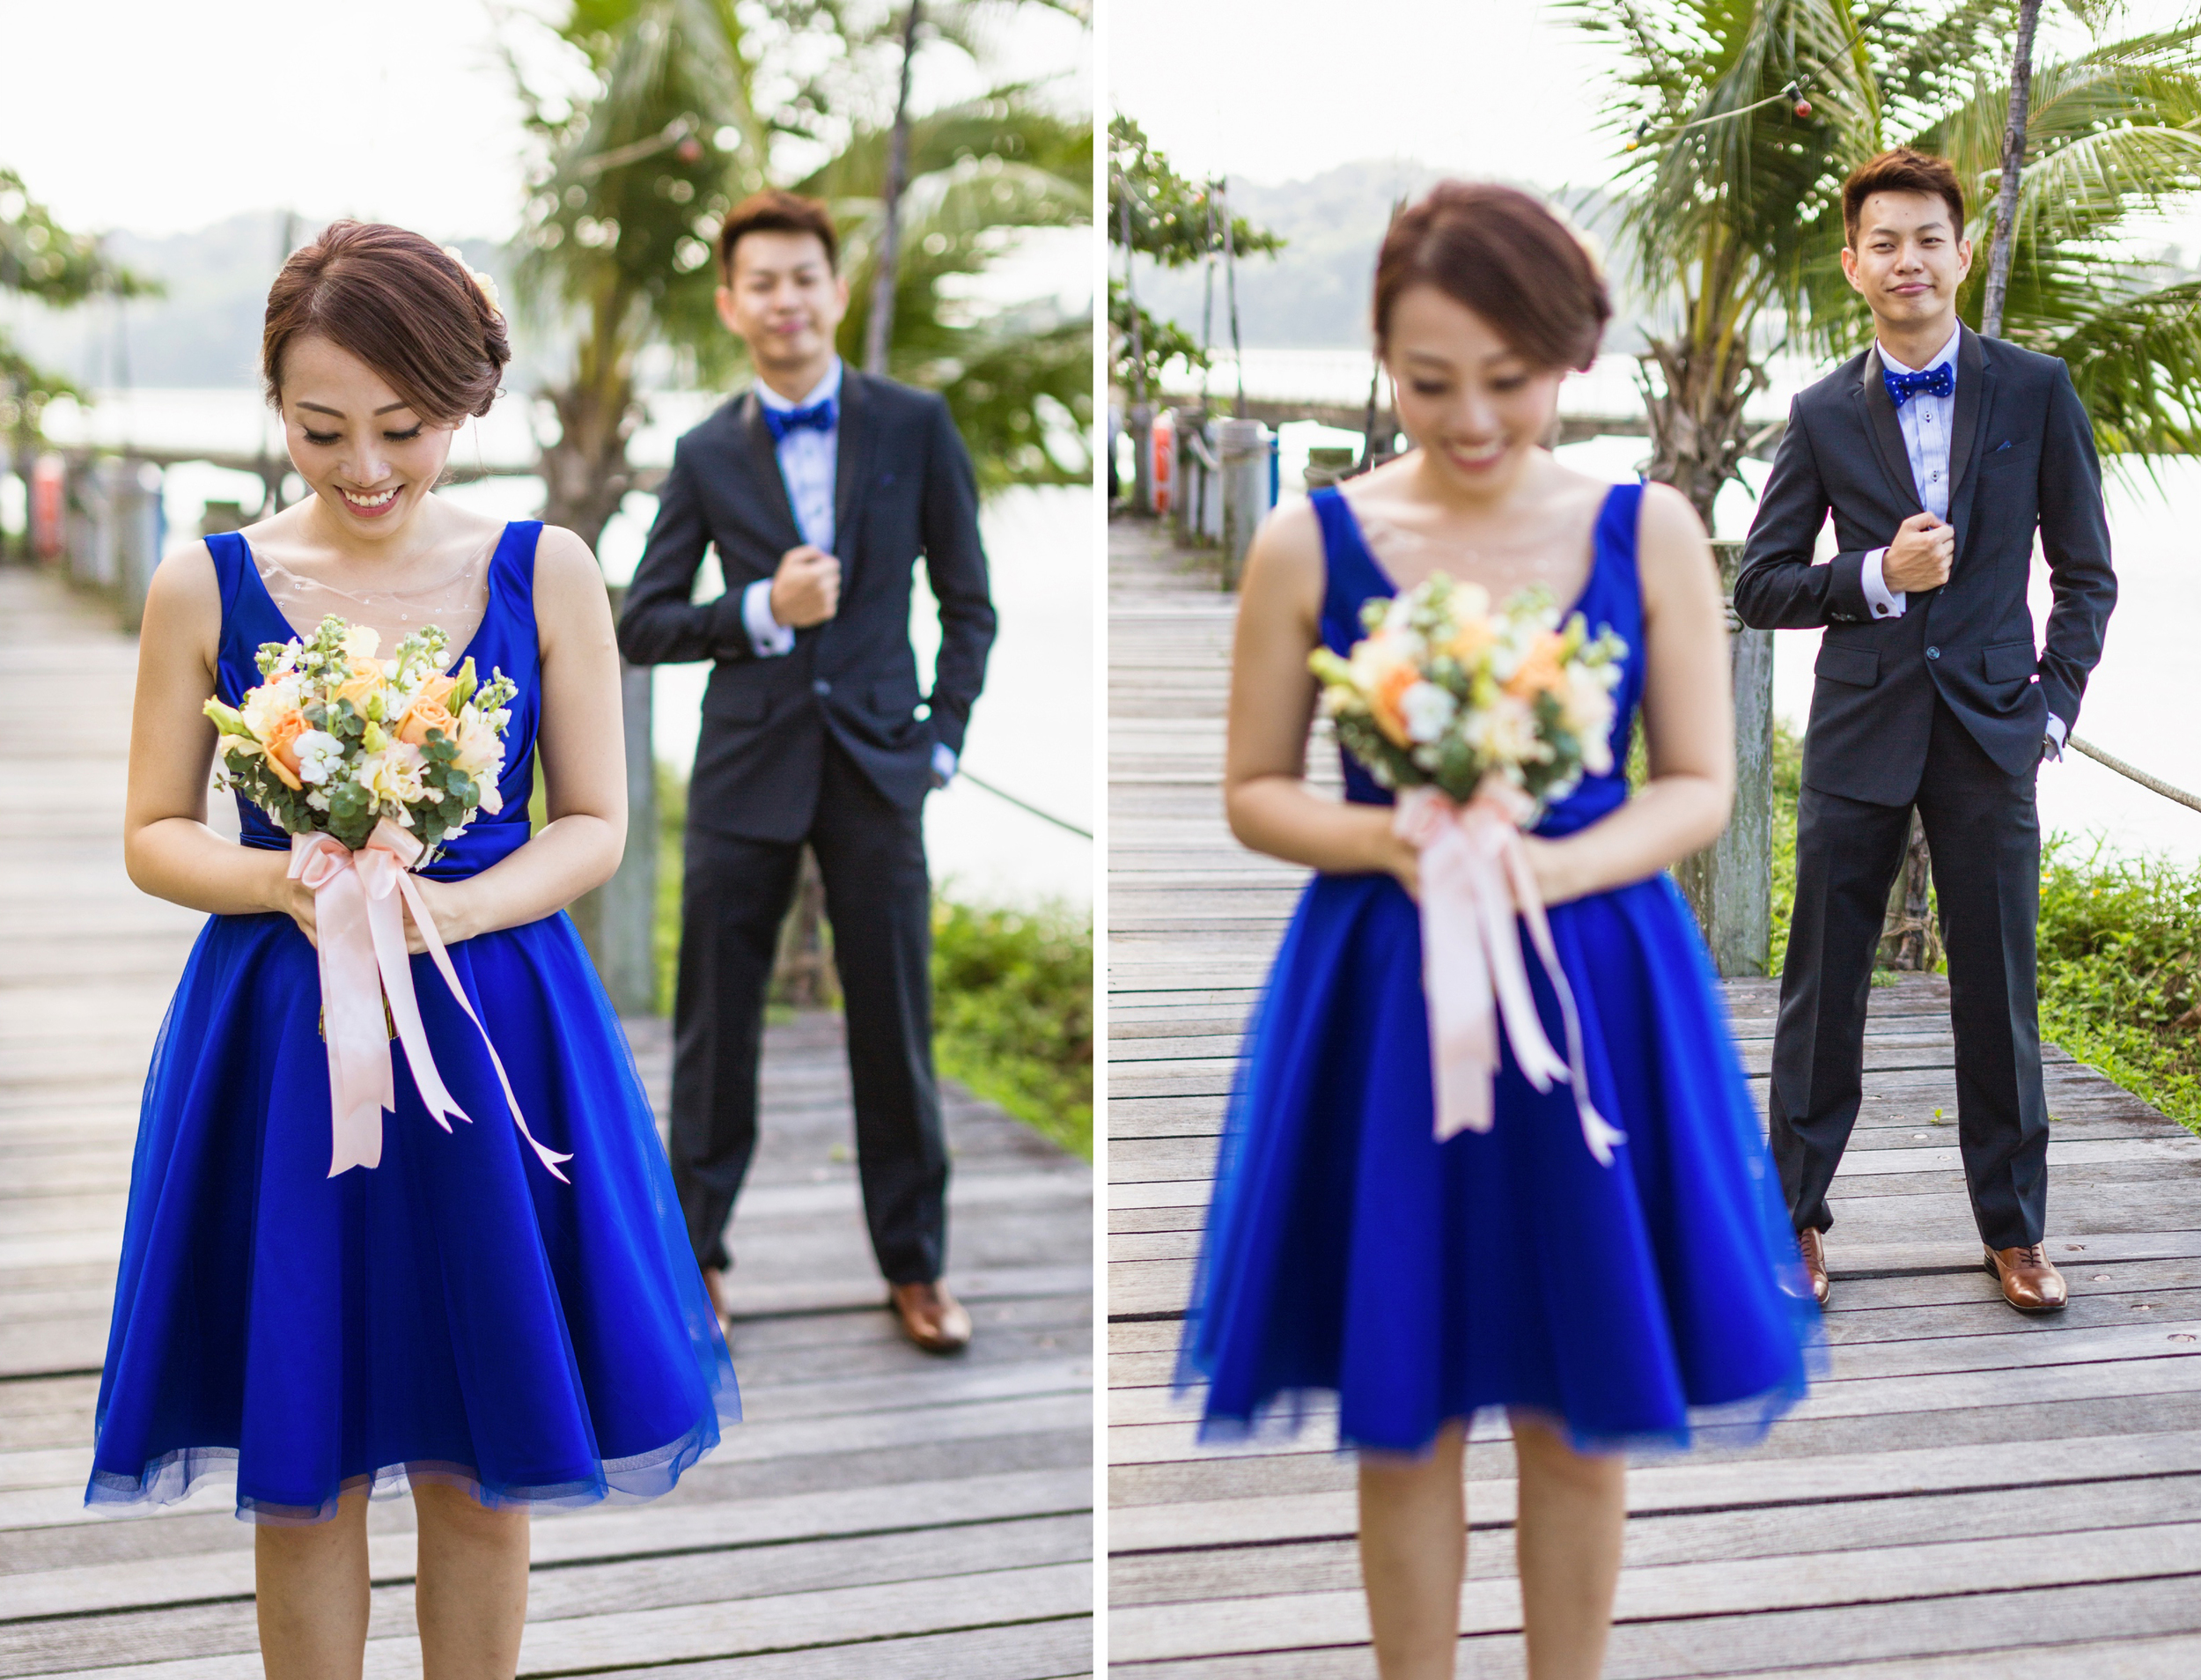 4 Reasons Why You Should Have An Outdoor Wedding Photo Shoot On Your Actual Day Wedding